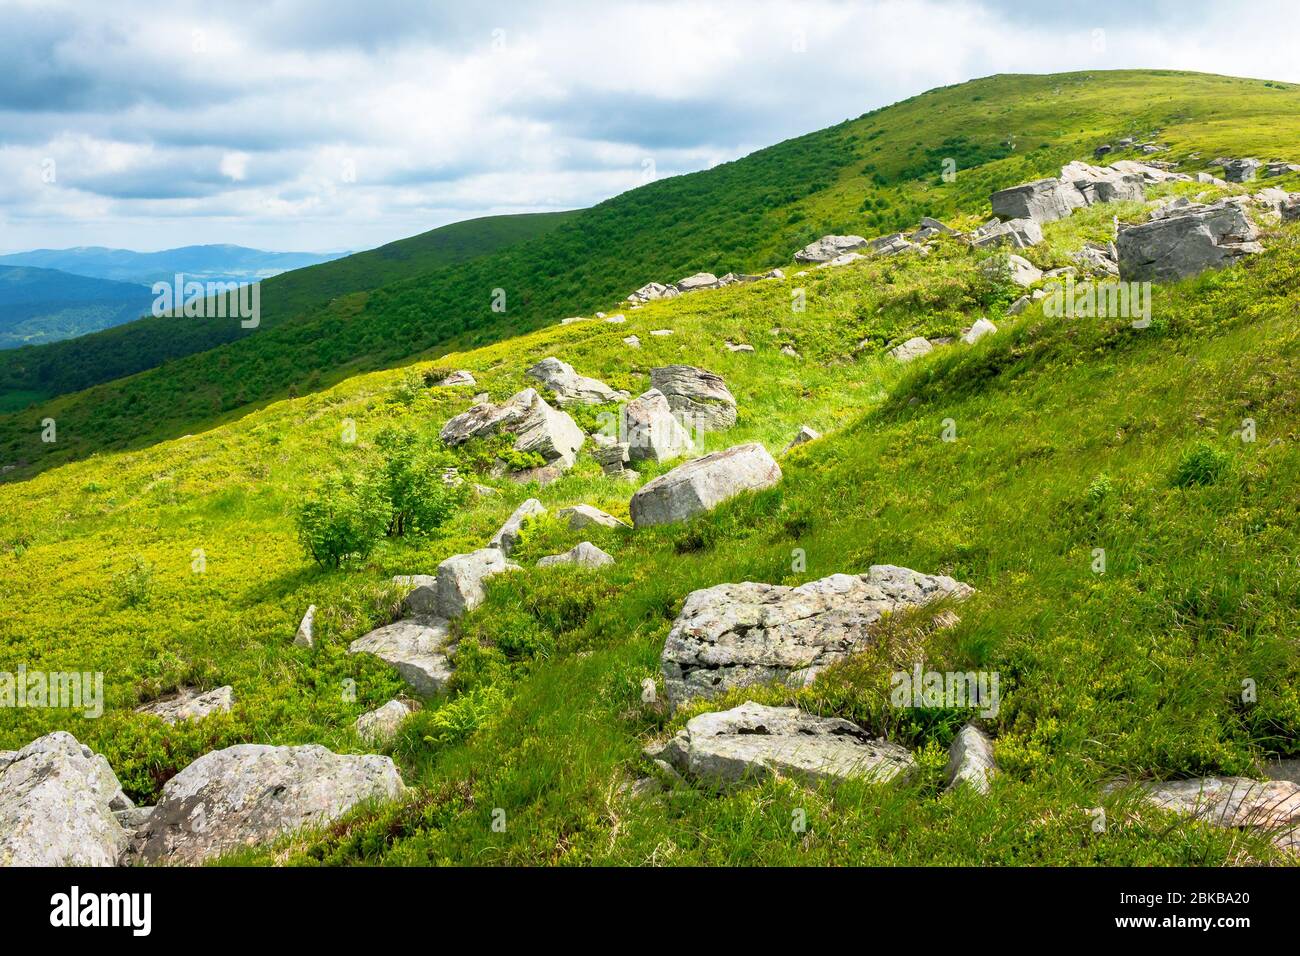 white rocks on the edge of alpine meadow. fresh green grassy slopes of mountain landscape in summer. distant ridges rolling in to the horizon. sunny w Stock Photo